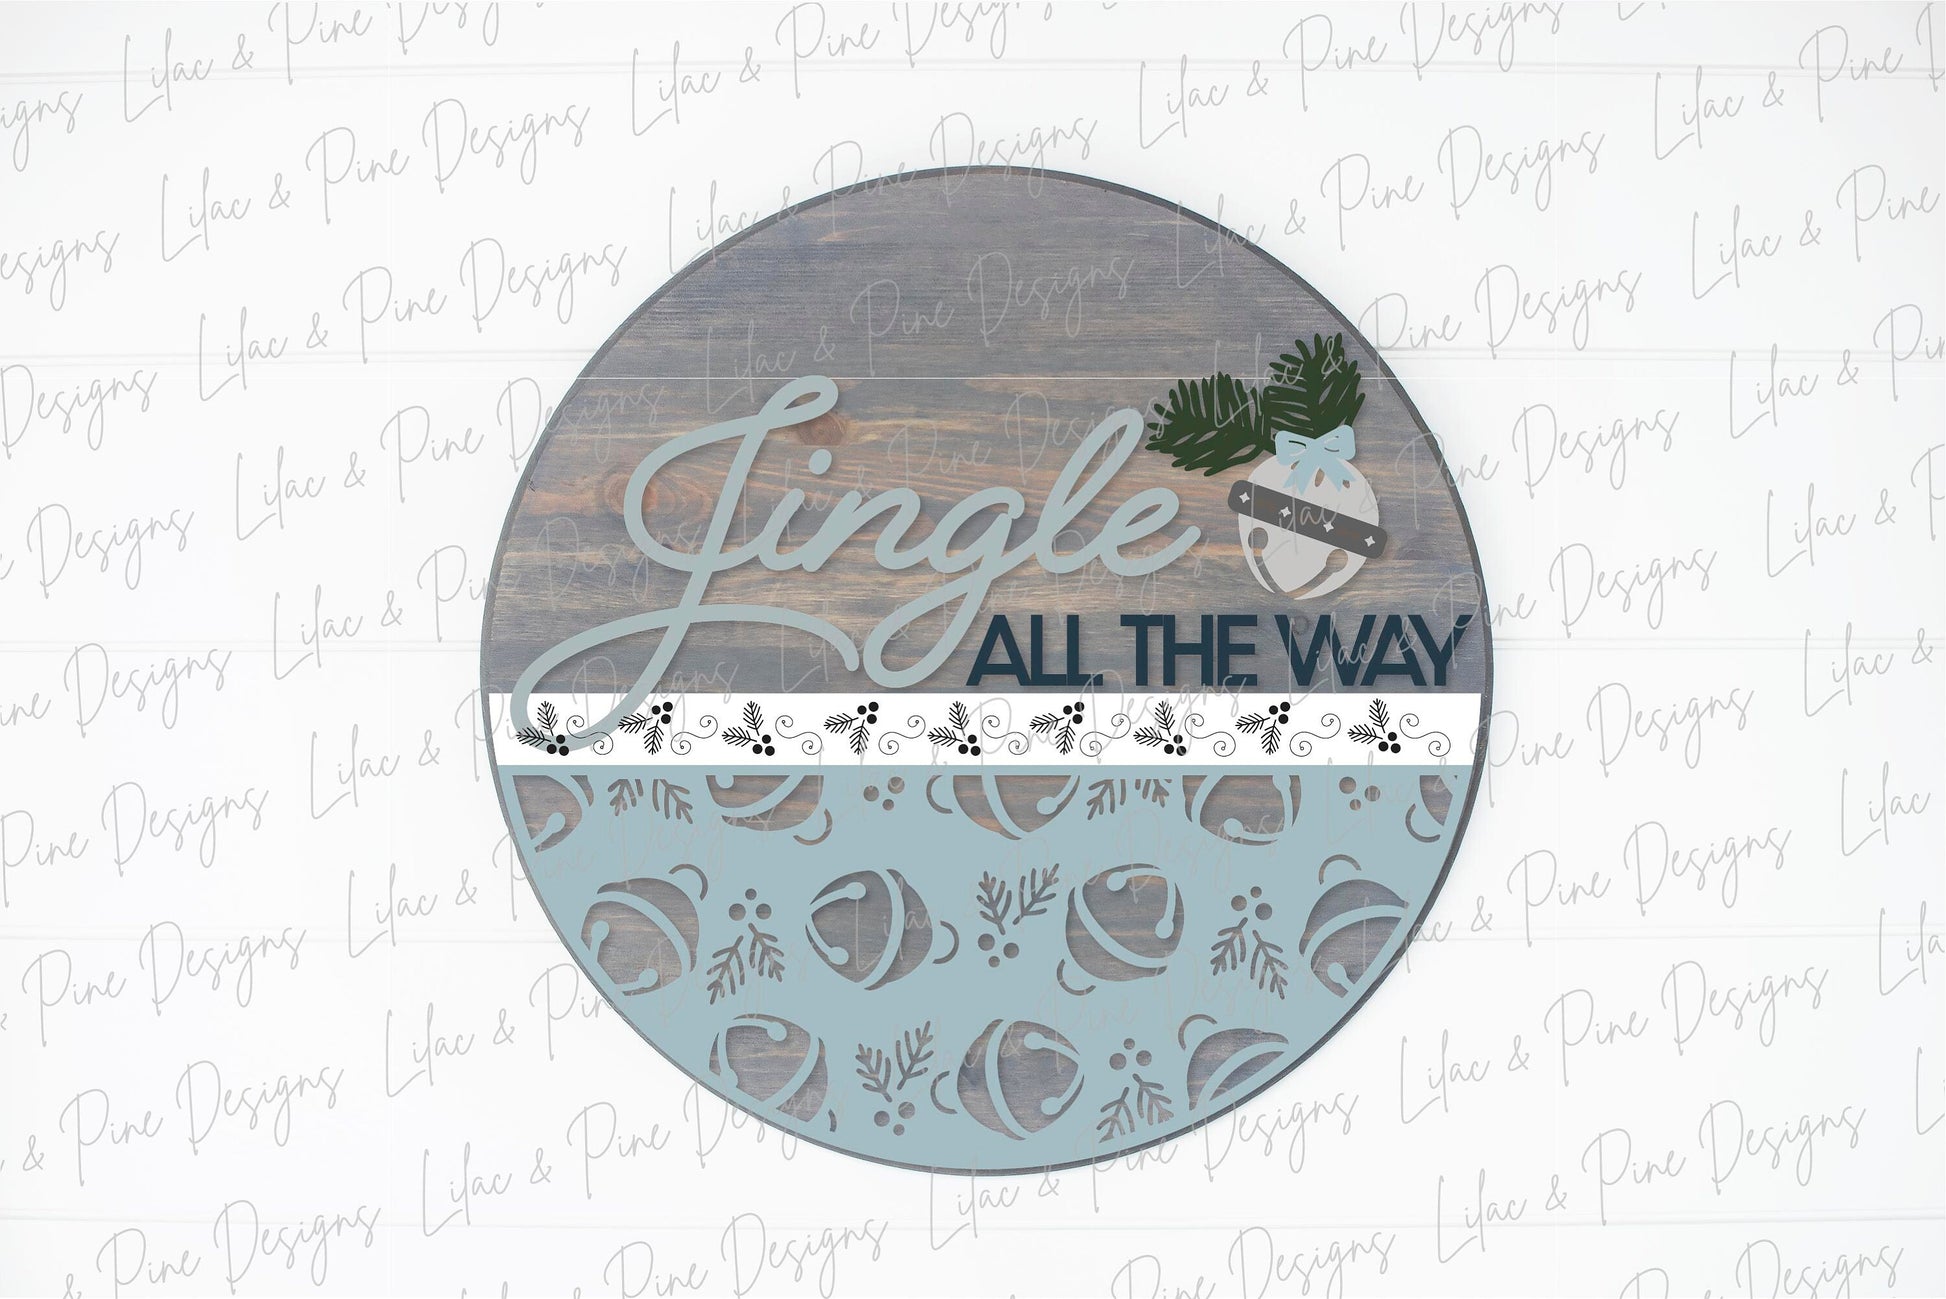 Jingle All the Way sign SVG, Christmas welcome sign SVG, Christmas door hanger SVG, Jingle Bells sign svg, Glowforge Svg, laser cut file